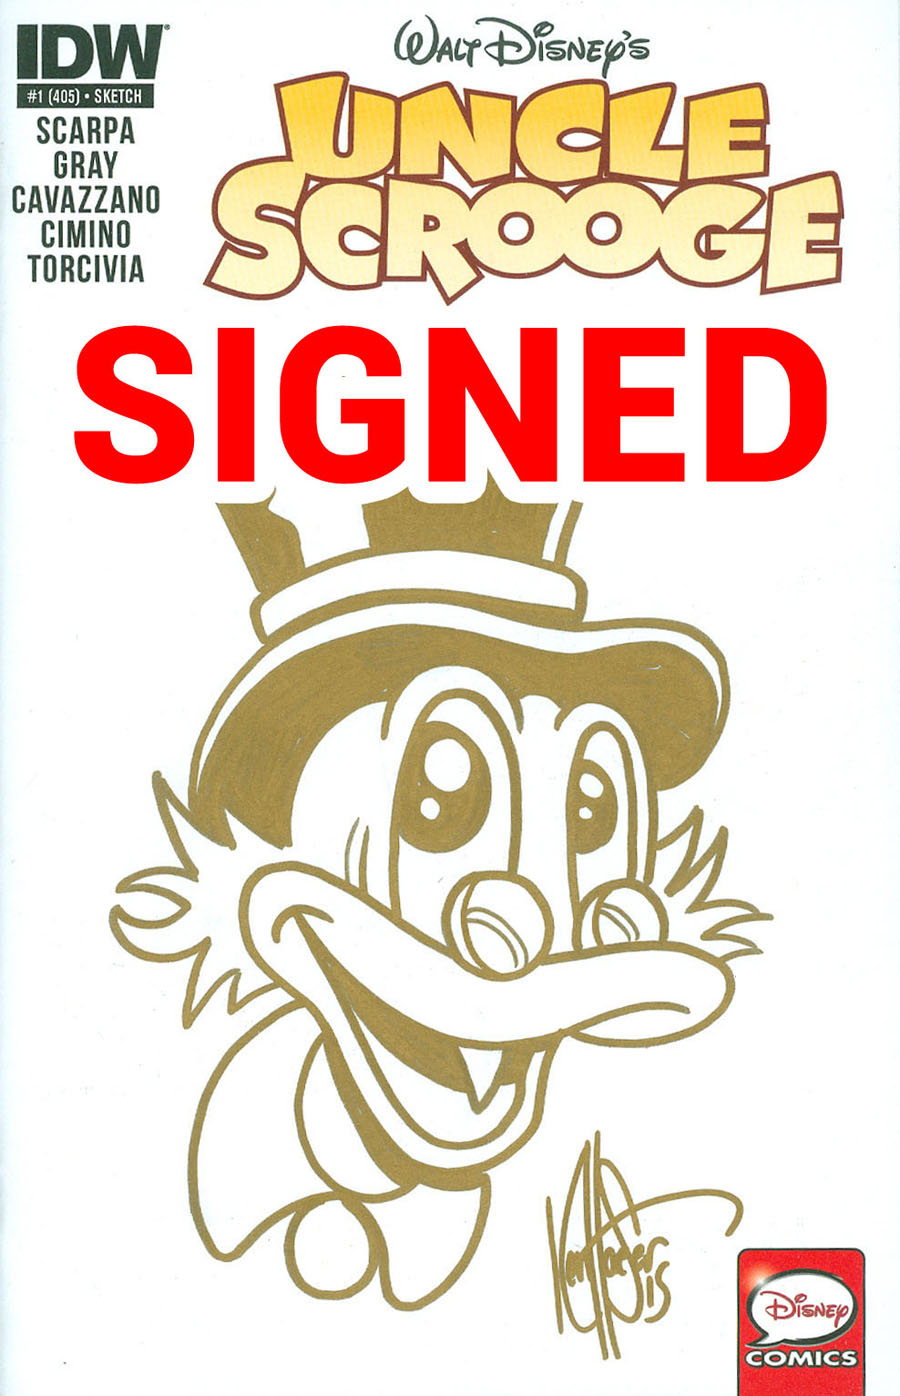 Uncle Scrooge Vol 2 #1 Cover F DF Gold Nugget Edition Ken Haeser Signed & Remarked With An Uncle Scrooge Hand-Drawn Sketch In Gold Ink Variant Cover